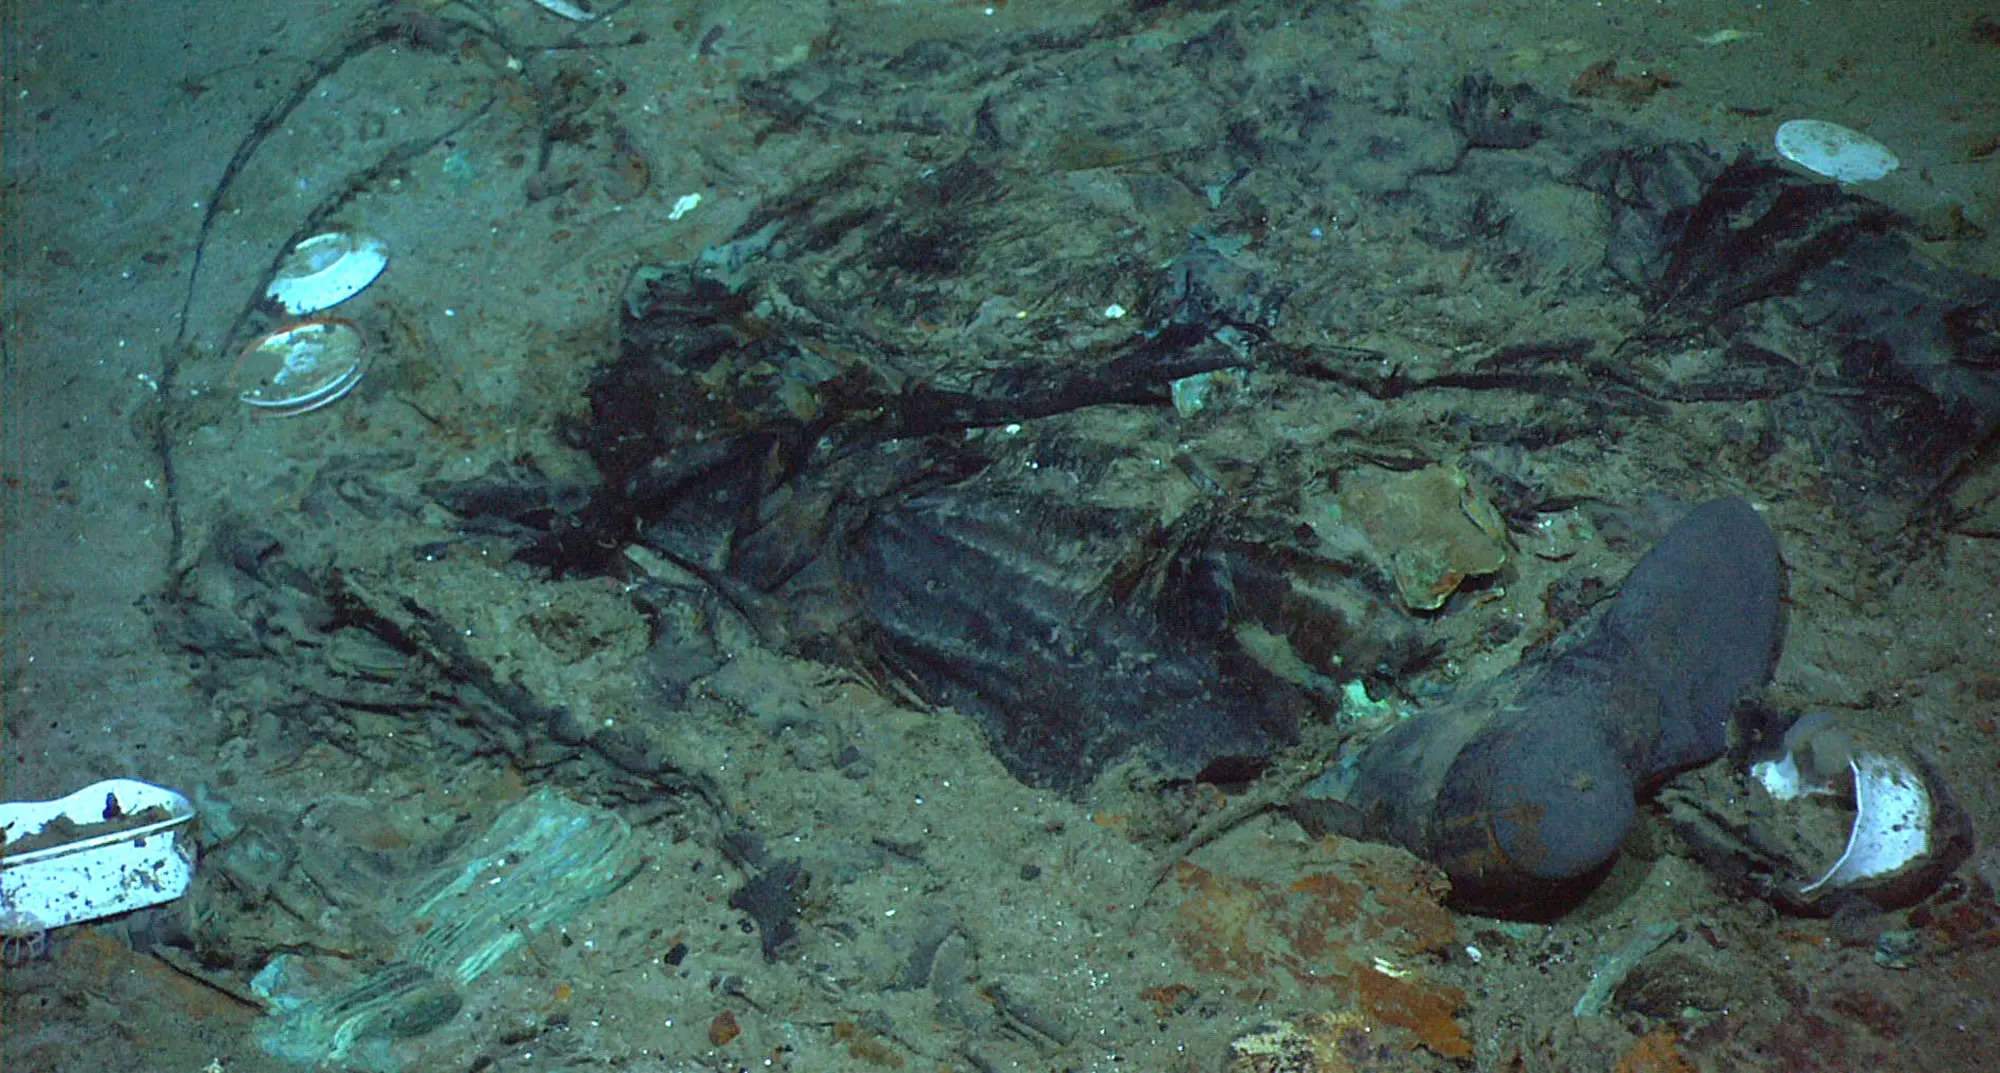 <p>FILE - This 2004 photo provided by the Institute for Exploration, Center for Archaeological Oceanography/University of Rhode Island/NOAA Office of Ocean Exploration, shows the remains of a coat and boots in the mud on the sea bed near the Titanic's stern. The wrecks of the Titanic and the Titan sit on the ocean floor, separated by 1,600 feet (490 meters) and 111 years of history. How they came together unfolded over an intense week that raised temporary hopes and left lingering questions. (Institute for Exploration, Center for Archaeological Oceanography/University of Rhode Island/NOAA Office of Ocean Exploration, File)</p>